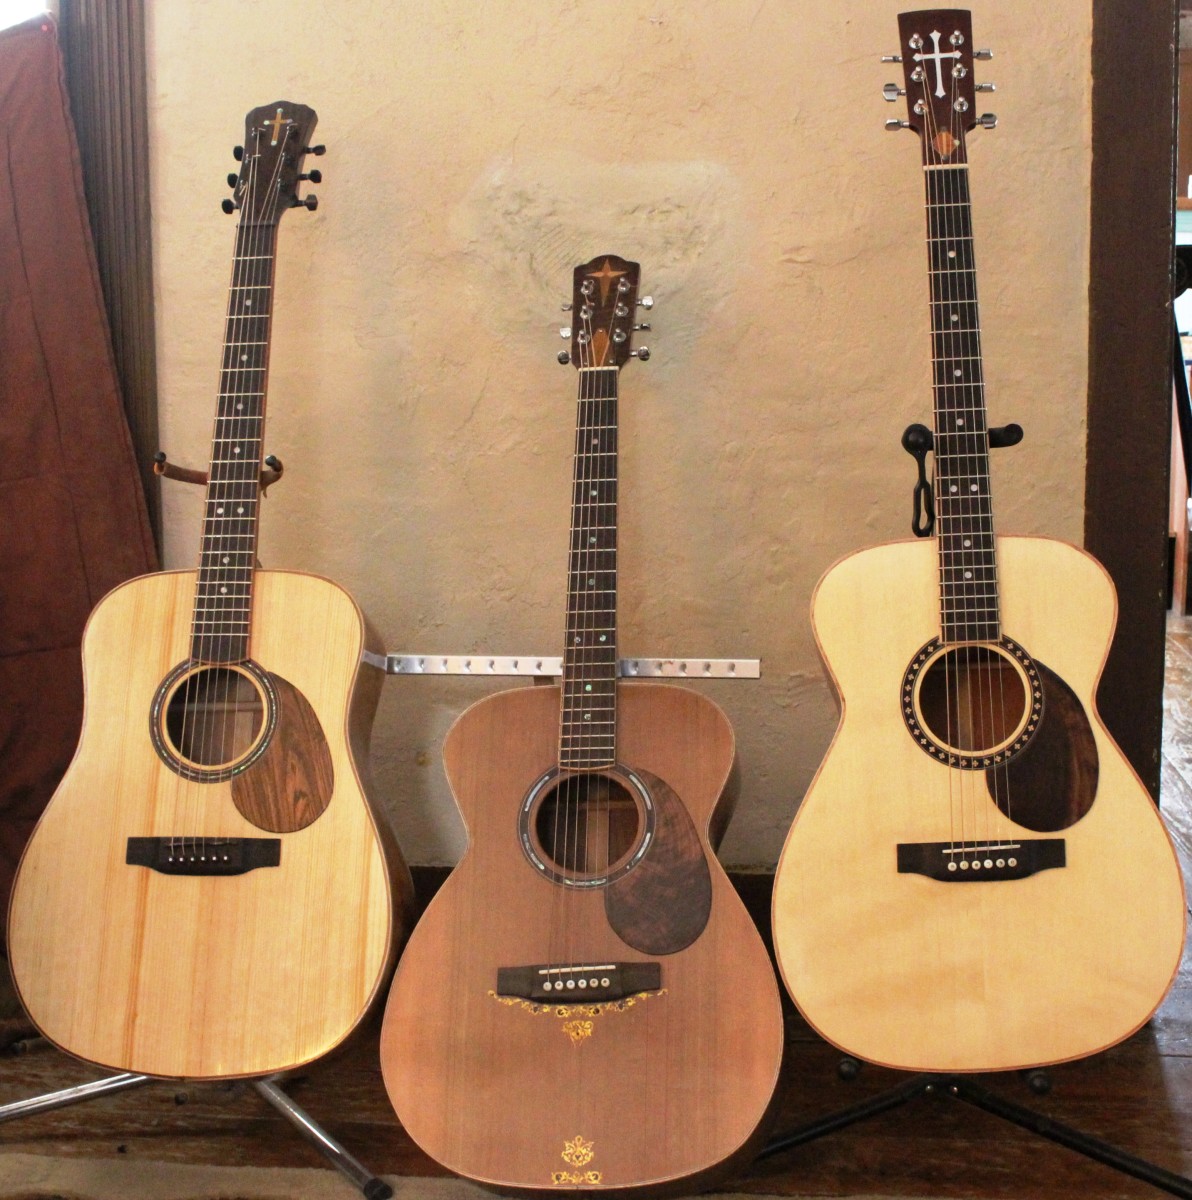 What do you need to make an acoustic guitar?